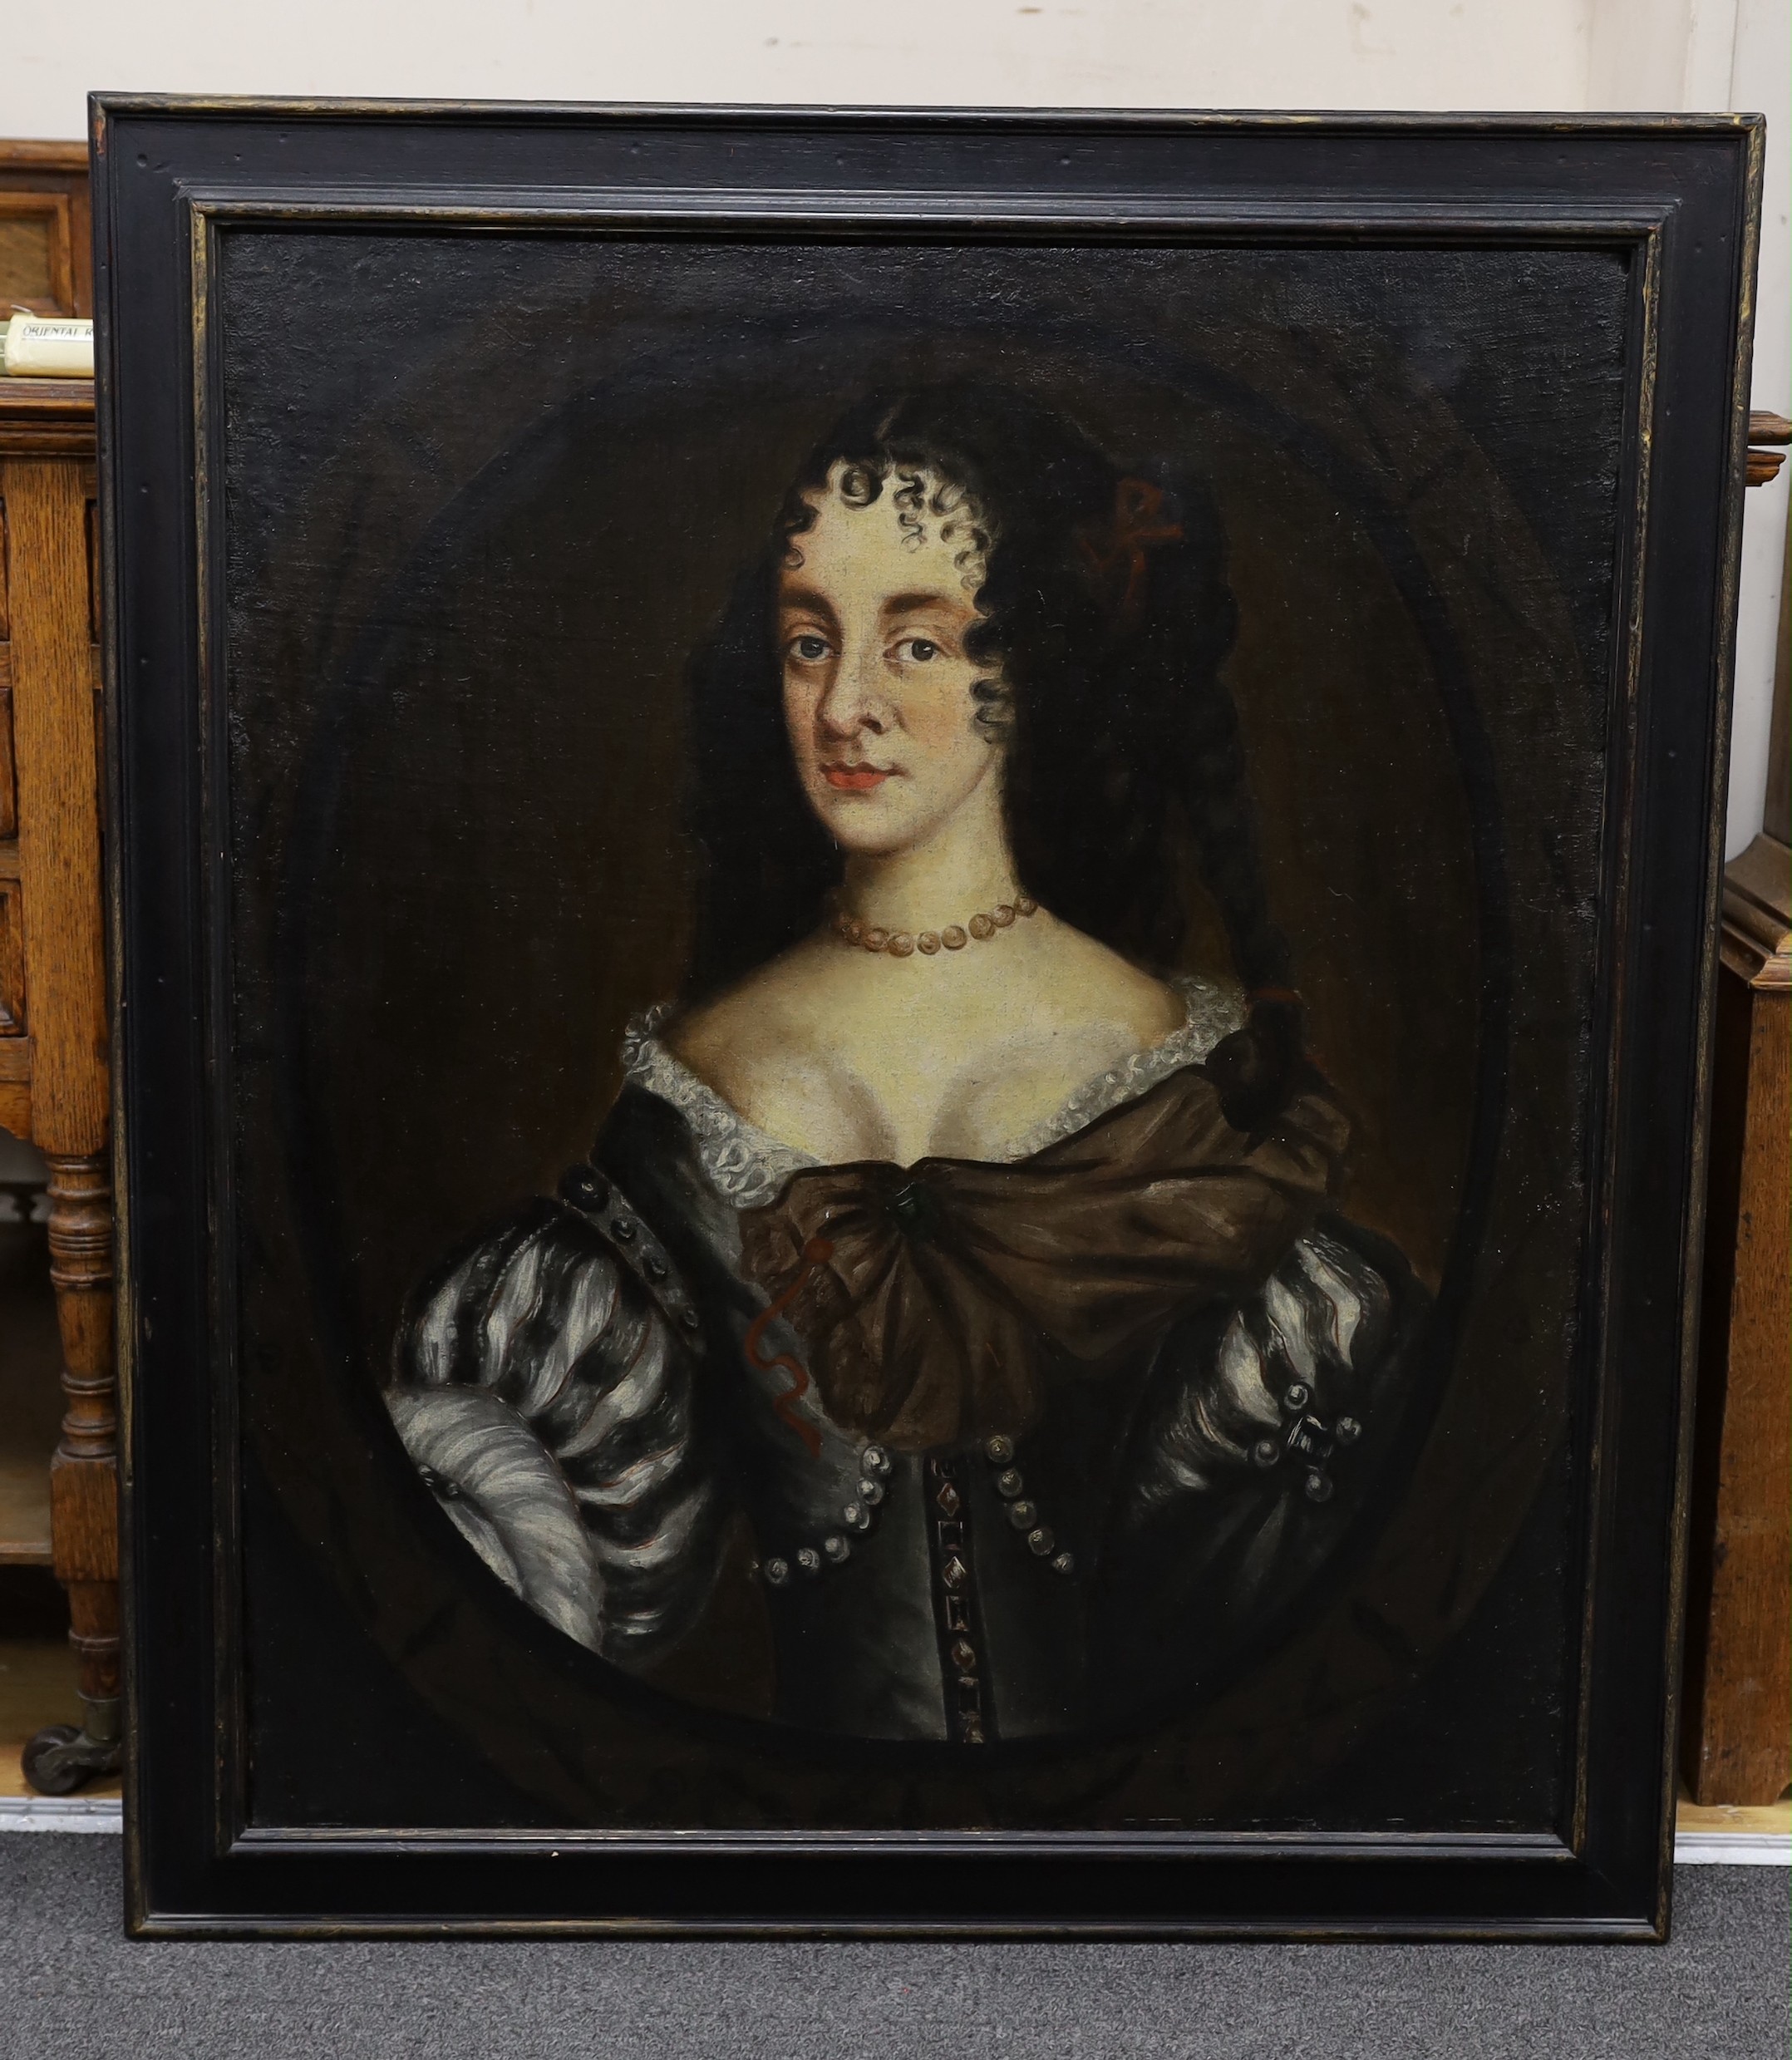 17th century English School, oil on canvas, Portrait of a lady thought to be Henrietta Maria, 78 x 66cm